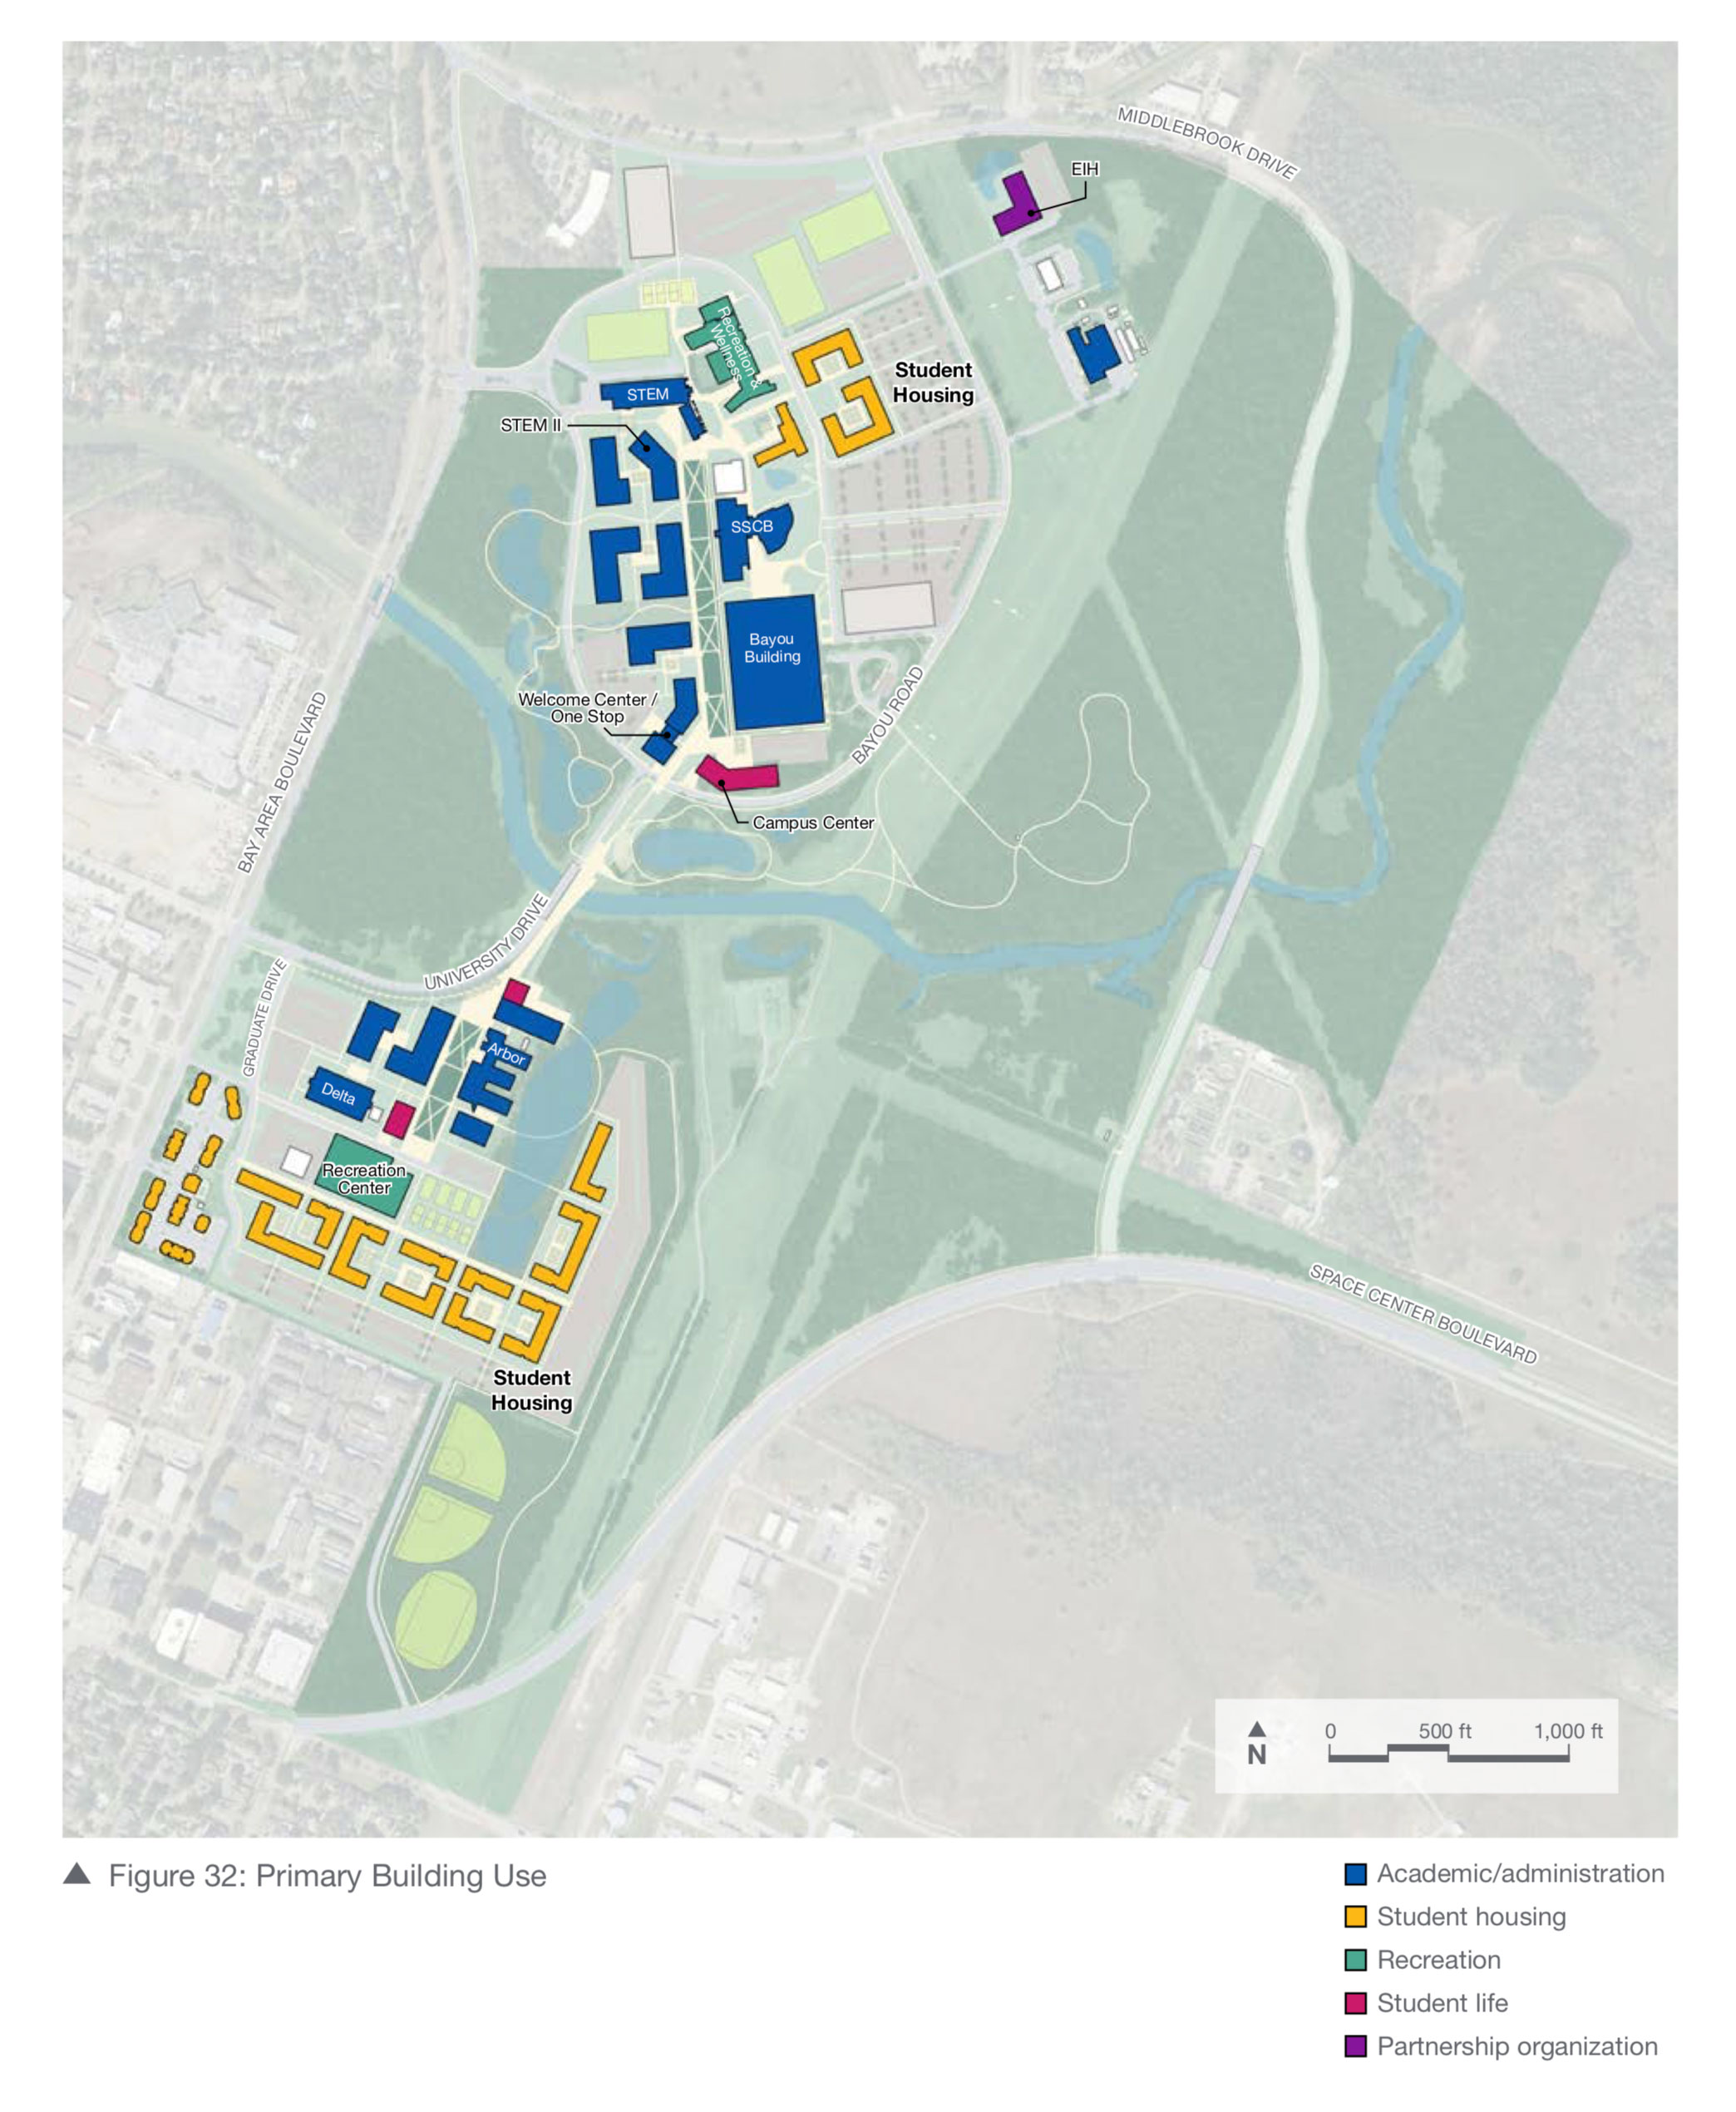 PHOTO: Screenshot depicts map of UHCL, displaying intended buildings as part of UHCL's Master Plan. The Master Plan shows specific plans for UHCL's Student Center. The location is pictured above, with the center being called, "The Campus Center." Image courtesy of Master Plan Committee, Executive Steering Committee and Consultant Team.